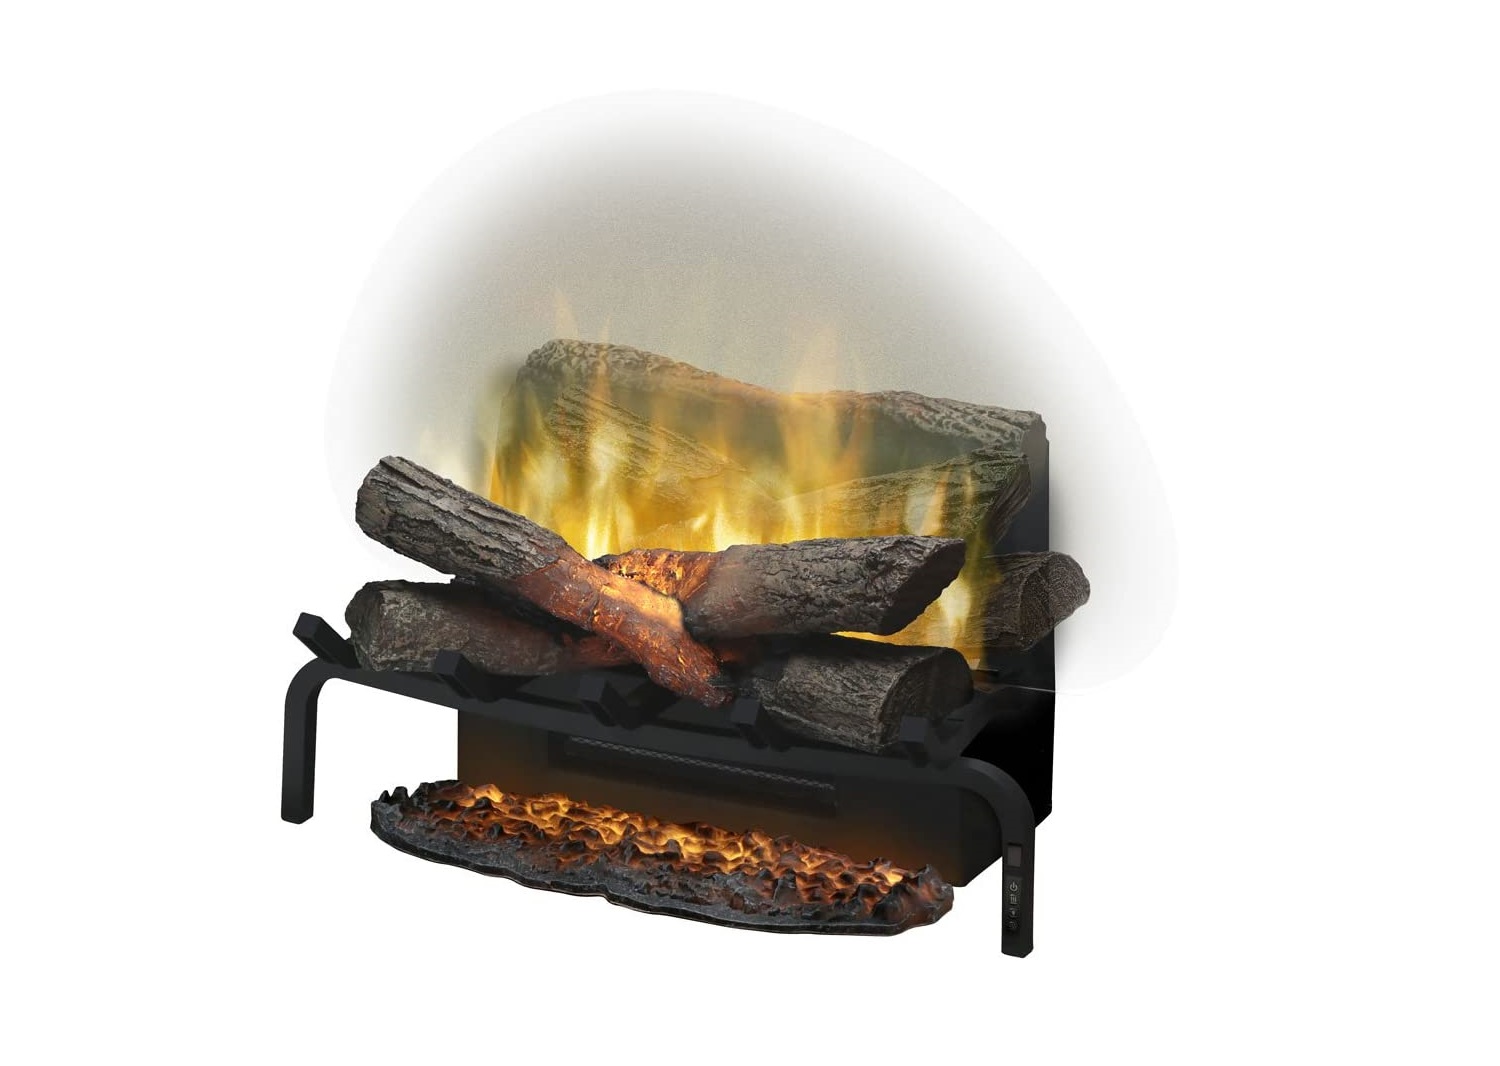 Dimplex DLG920 20″ Electric Fireplace Log Set Owner’s Manual